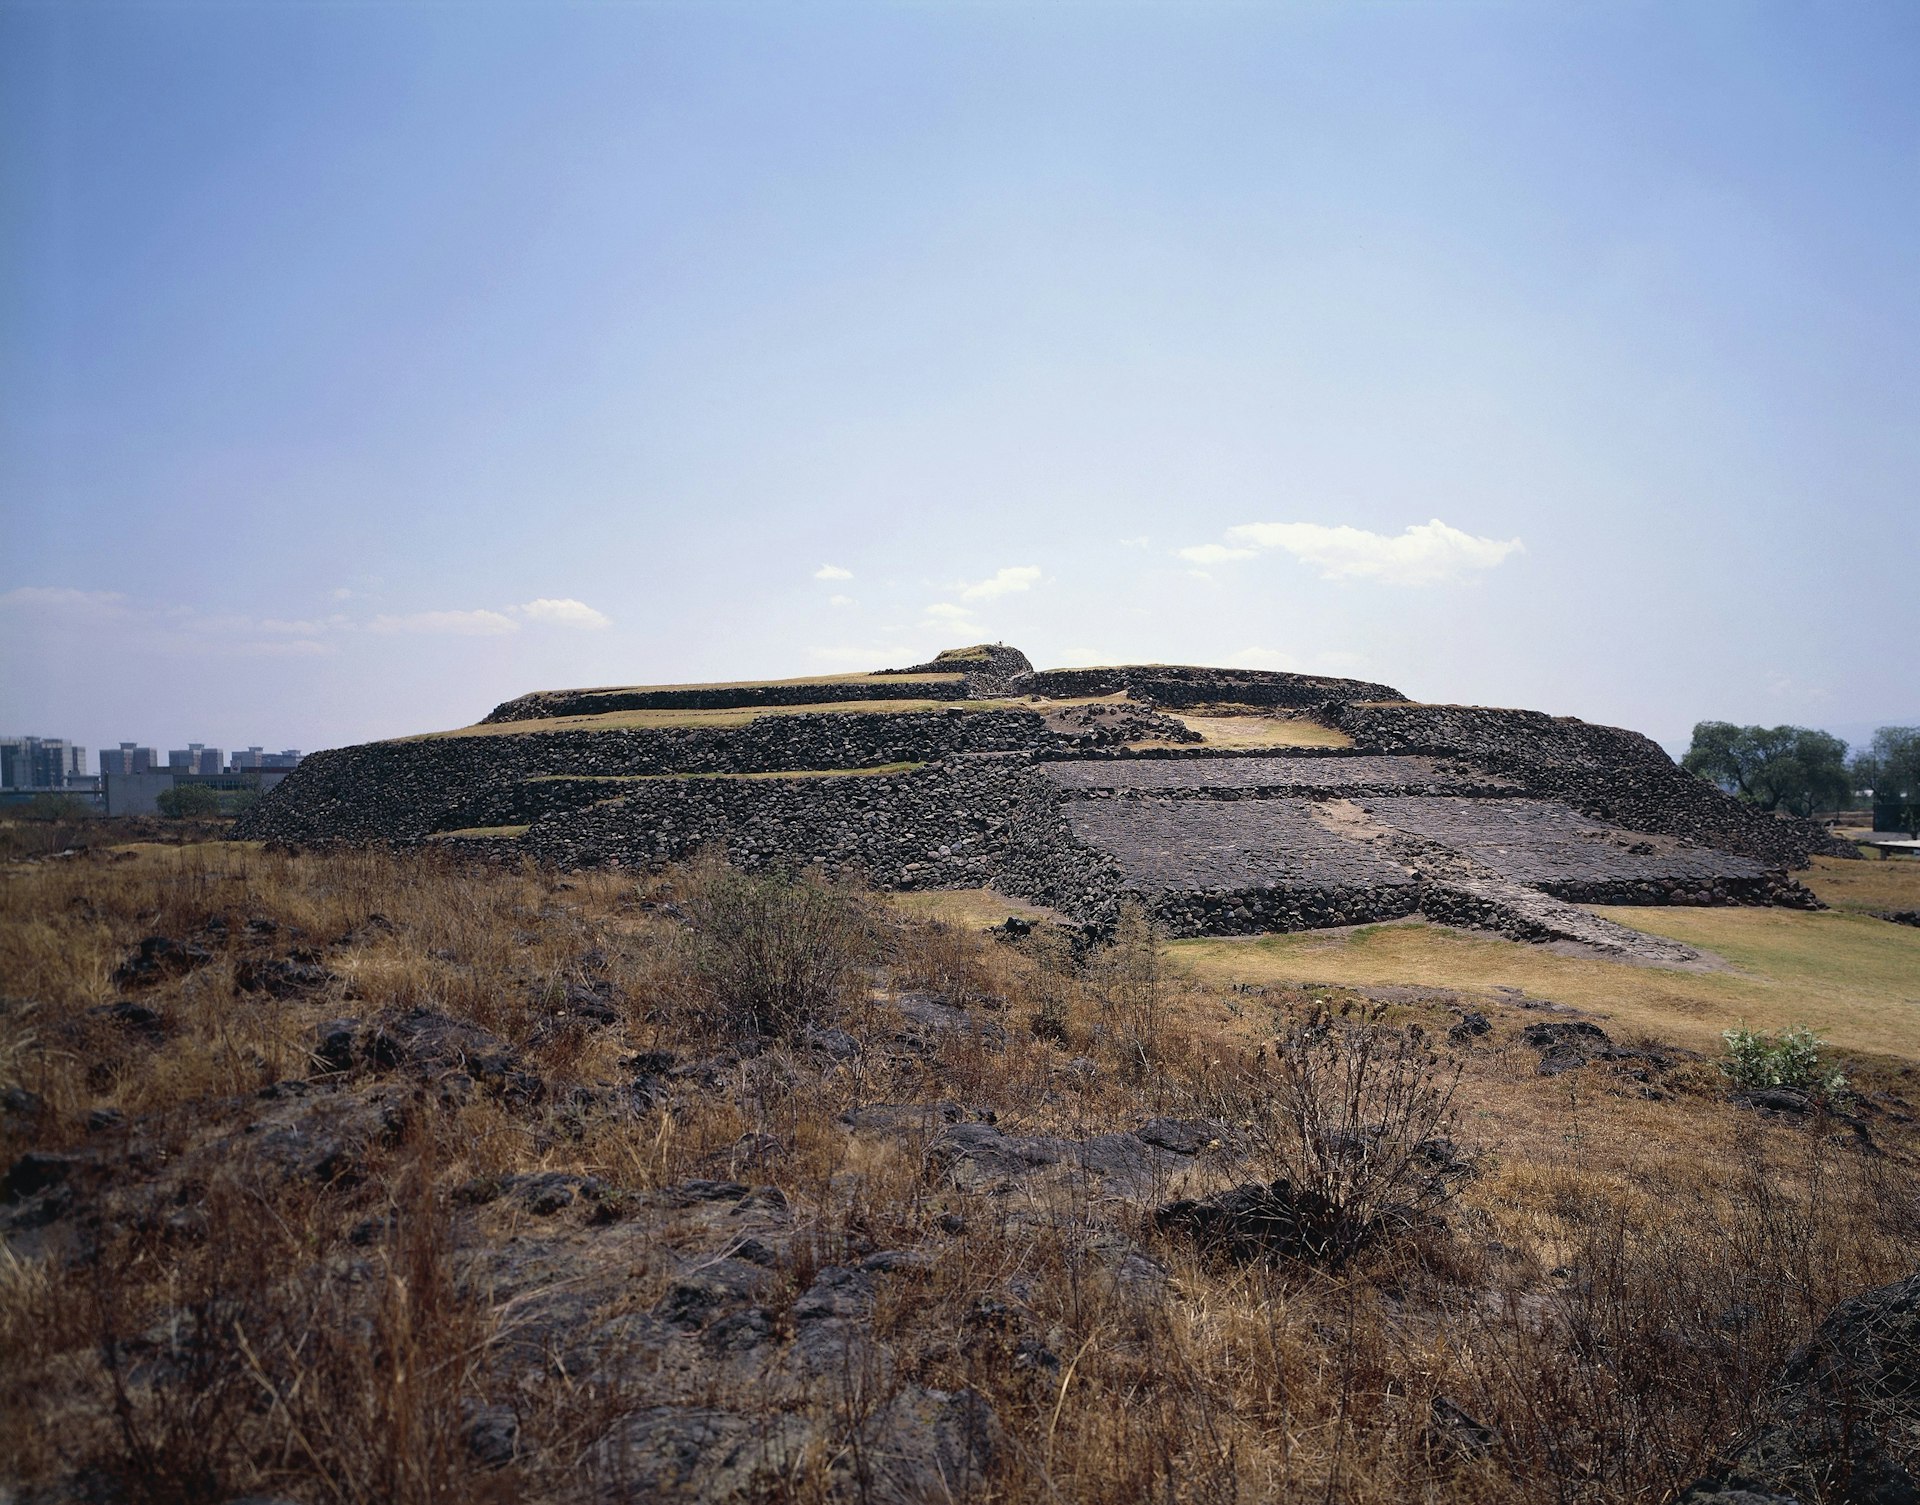 Cuicuilco pyramid Aztec archaeological site in Mexico